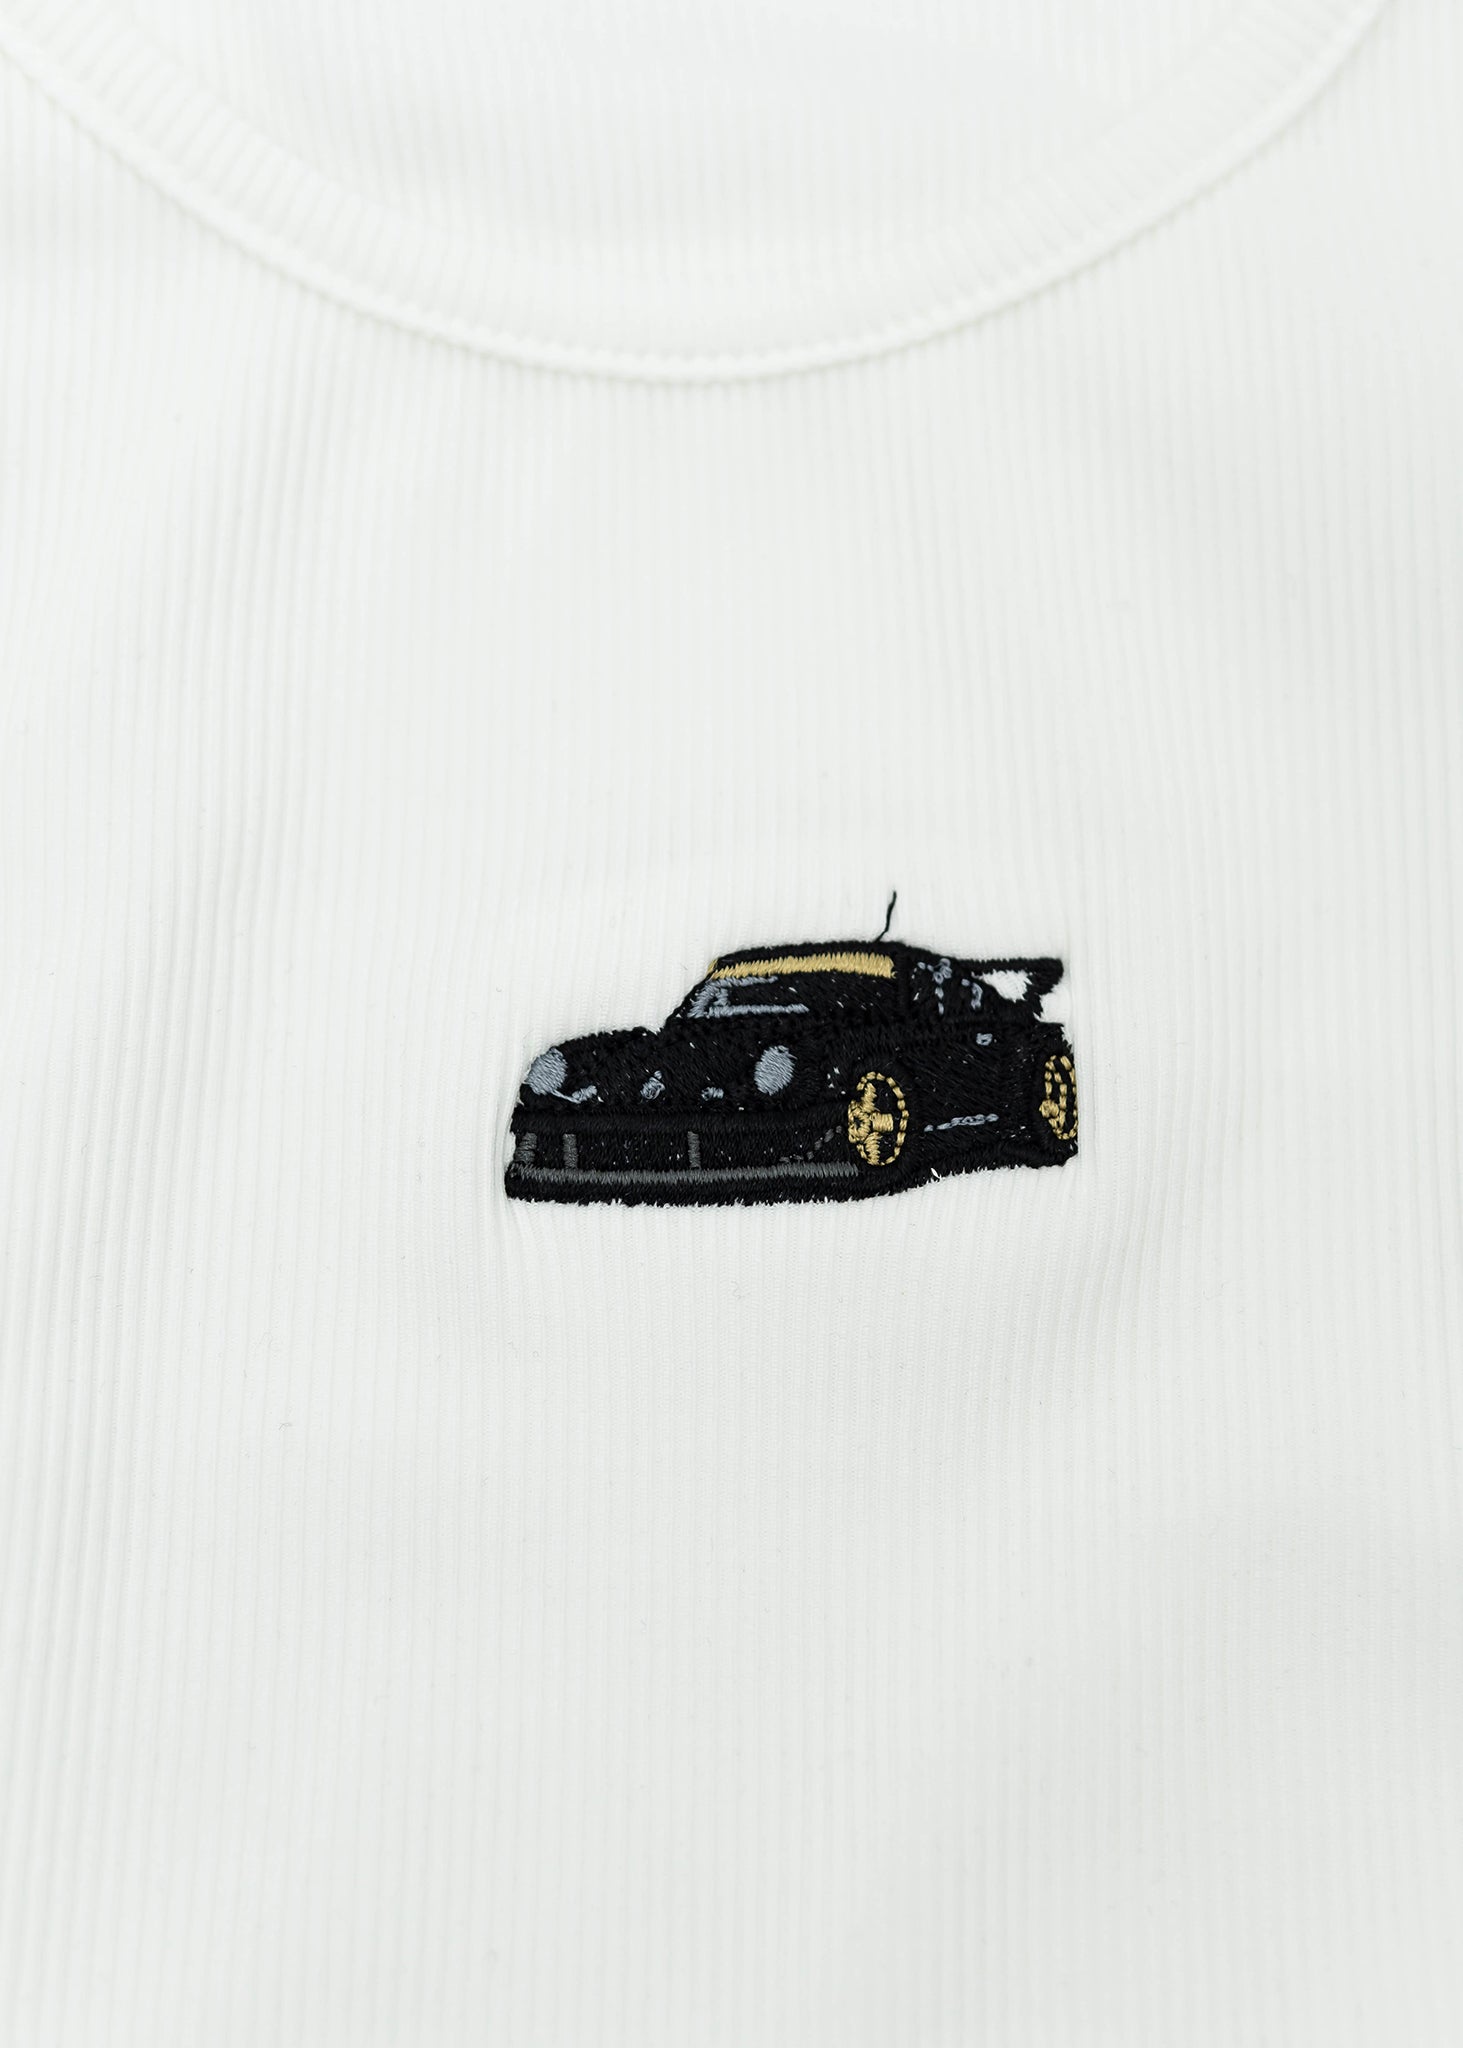 Close up of an embroidered RWB 930 911 Turbo - Akira Nakai "Stella Artois" on a women's high quality ribbed racer back crop top. Photo shows the detailed embroidery of a RWB 930 911 Turbo. Fabric composition of this tee is 95% polyester, and 5% elastane. The material is very stretchy, and form fitting. The style of this shirt is scoop neck, sleeveless, cropped at the waist, with embroidery in the middle.